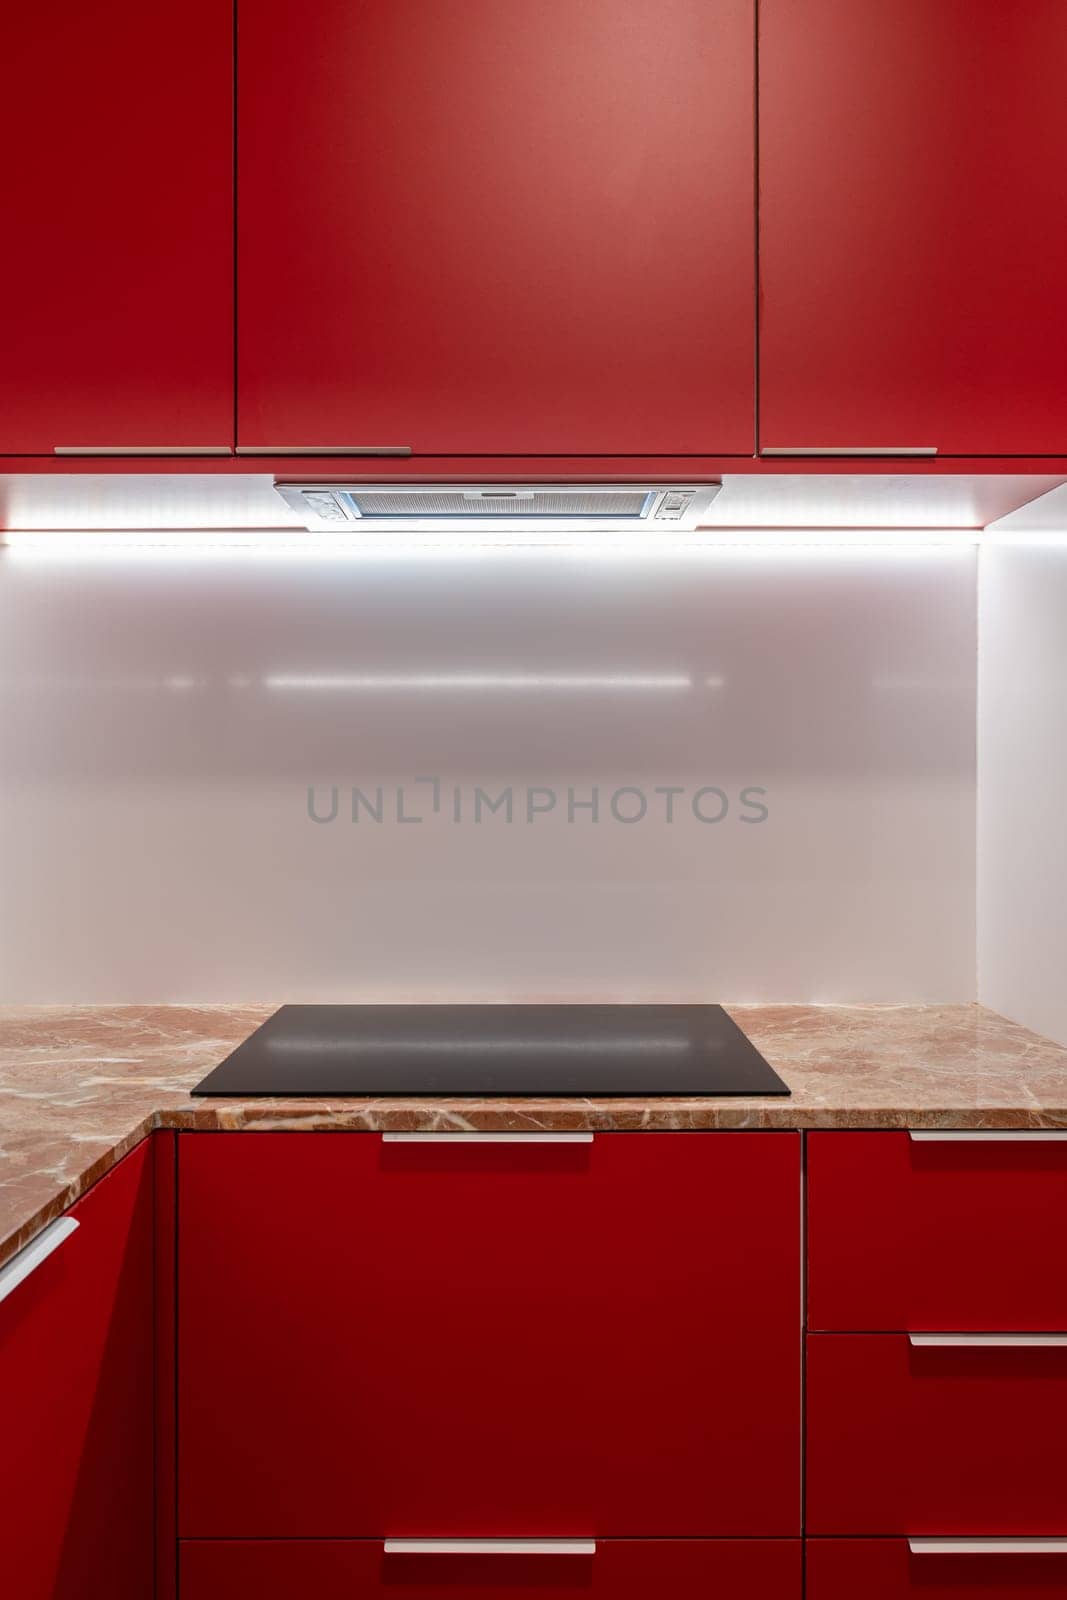 Minimalist red kitchen cabinet design with sleek handles and marble countertop by apavlin